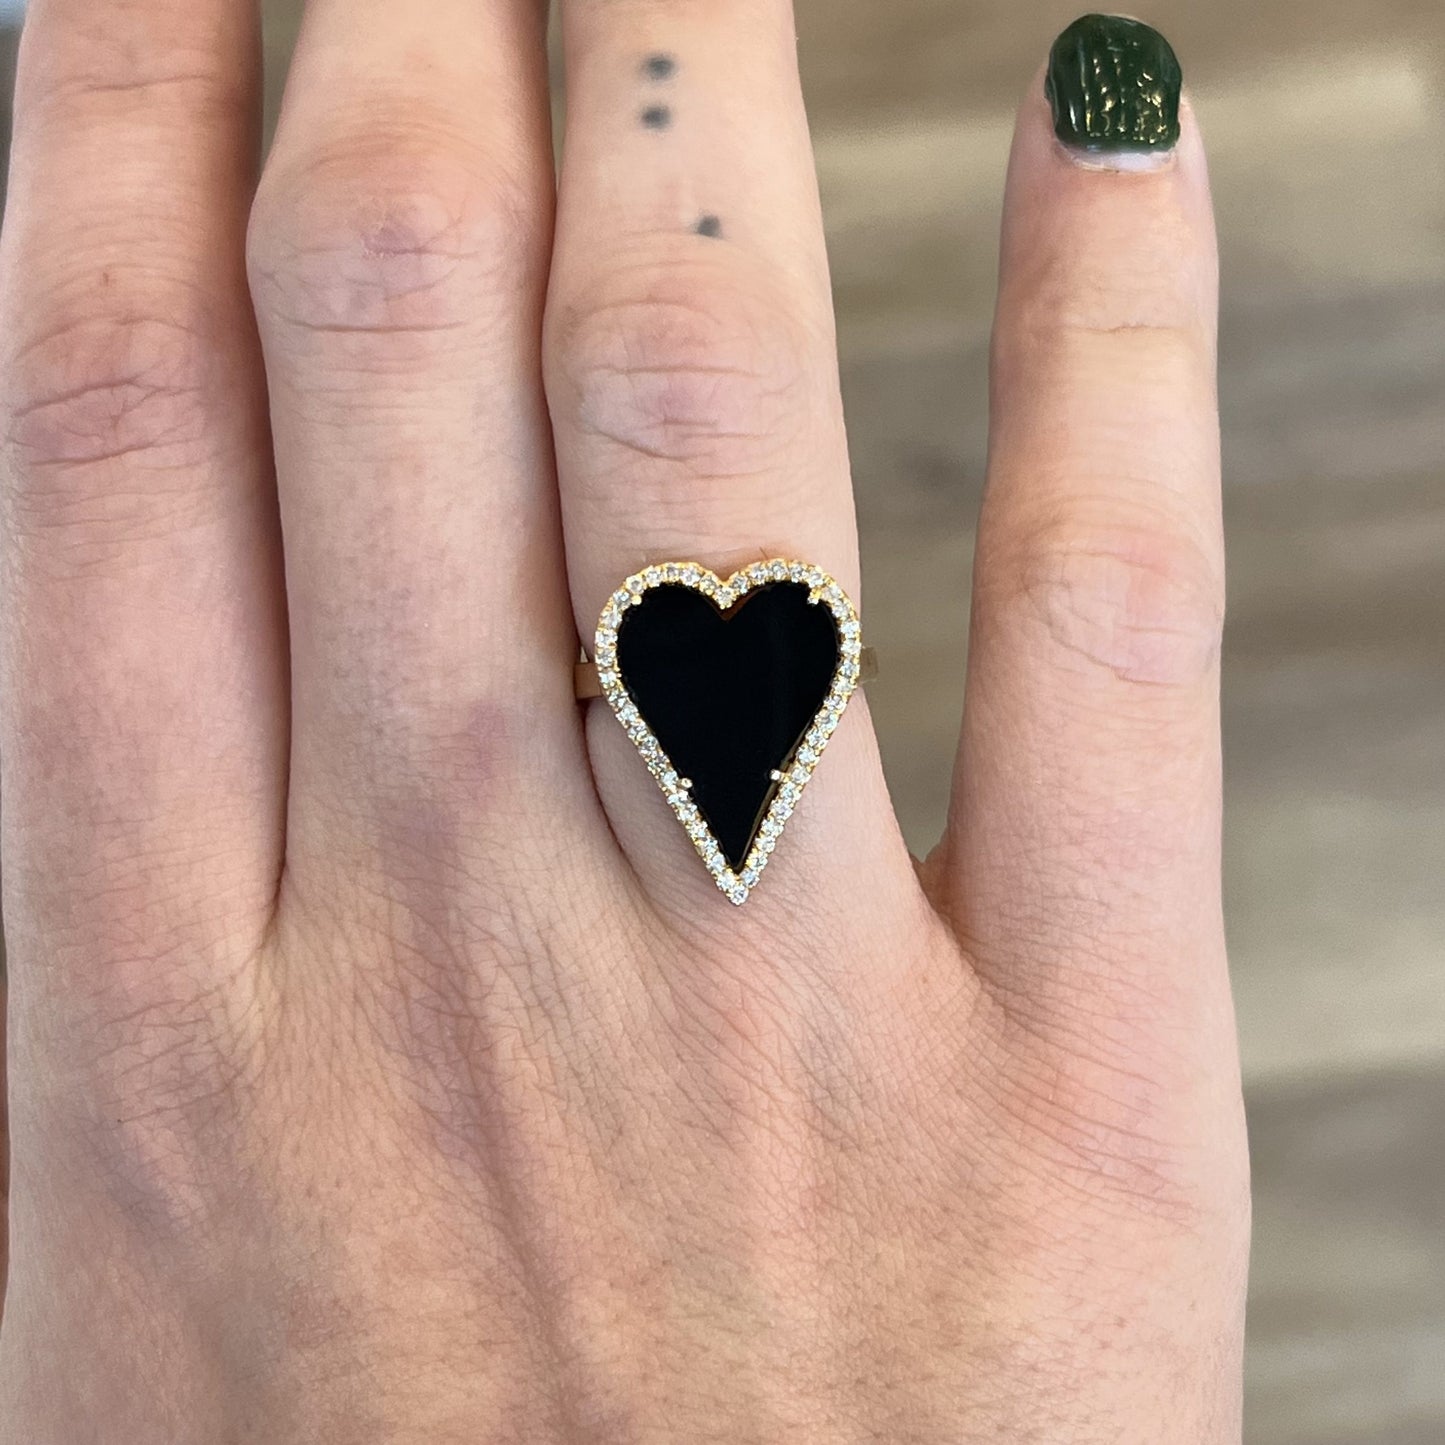 Heart Shaped Onyx & Diamond Cocktail Ring in 14k Yellow Gold